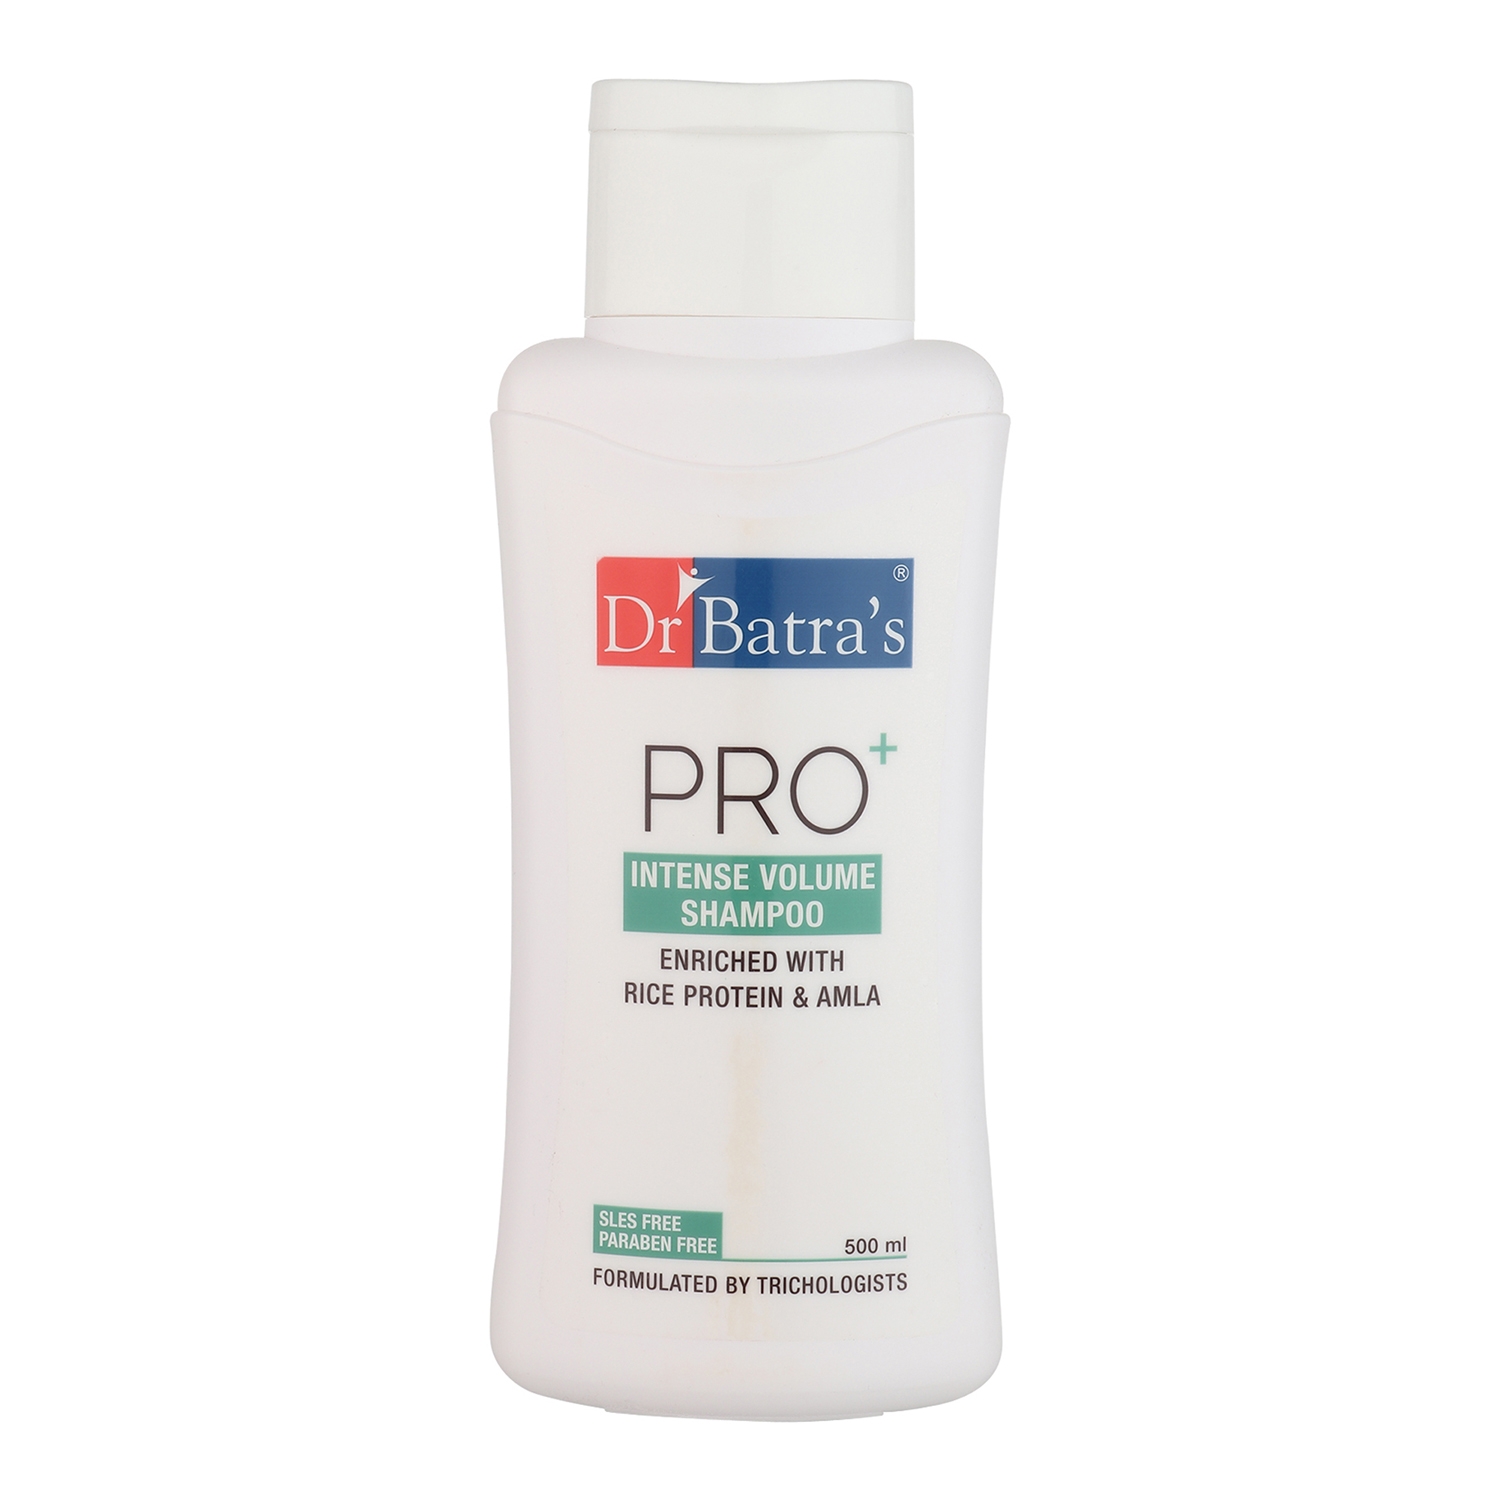 Dr Batra's | Dr Batra's Pro+ Intense Volume Shampoo Enriched With Rice protein & Amla - 500 ml